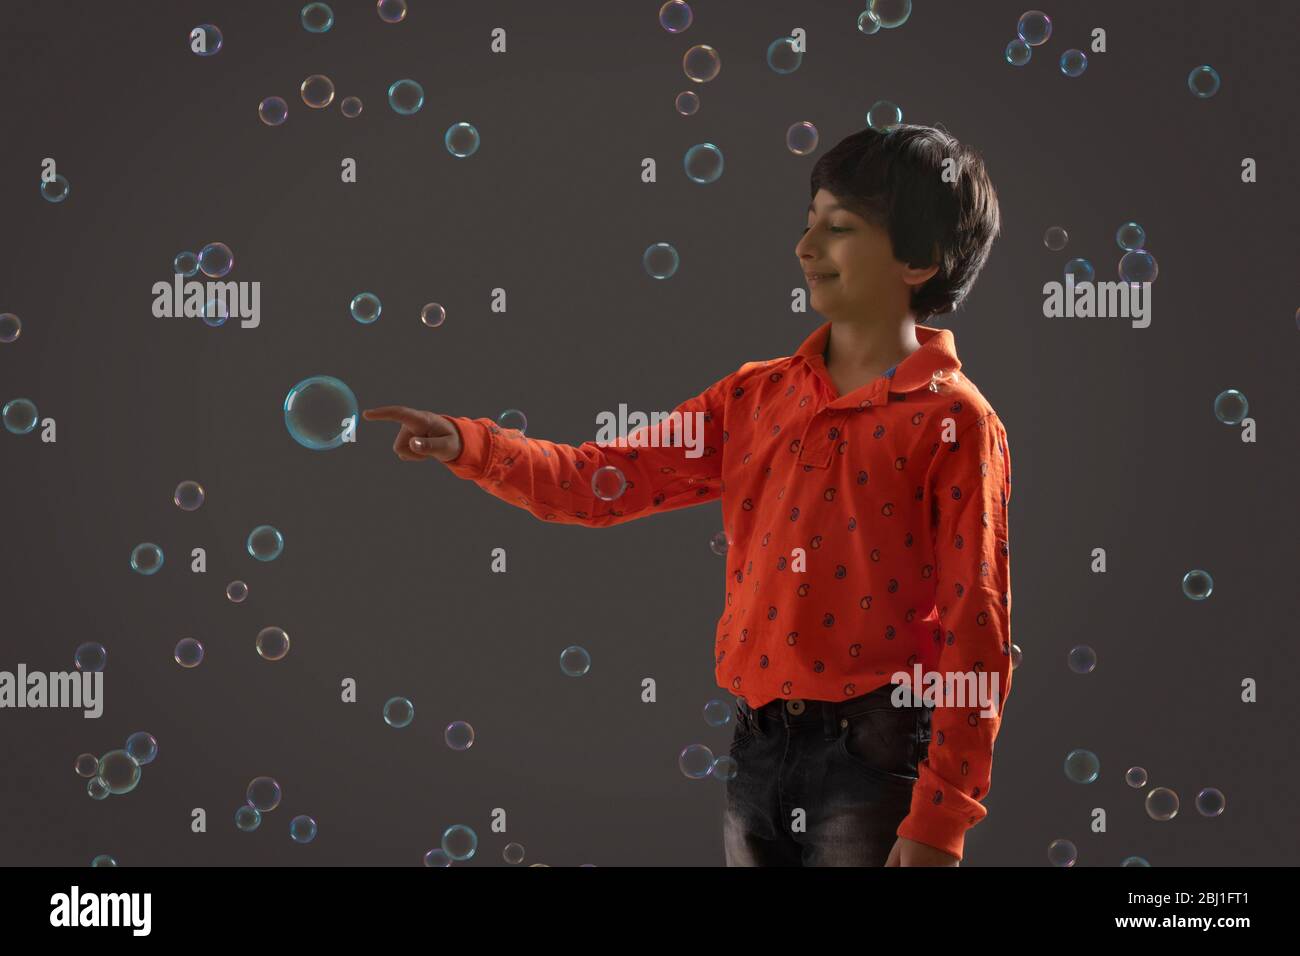 portrait of a young boy popping a bubble Stock Photo